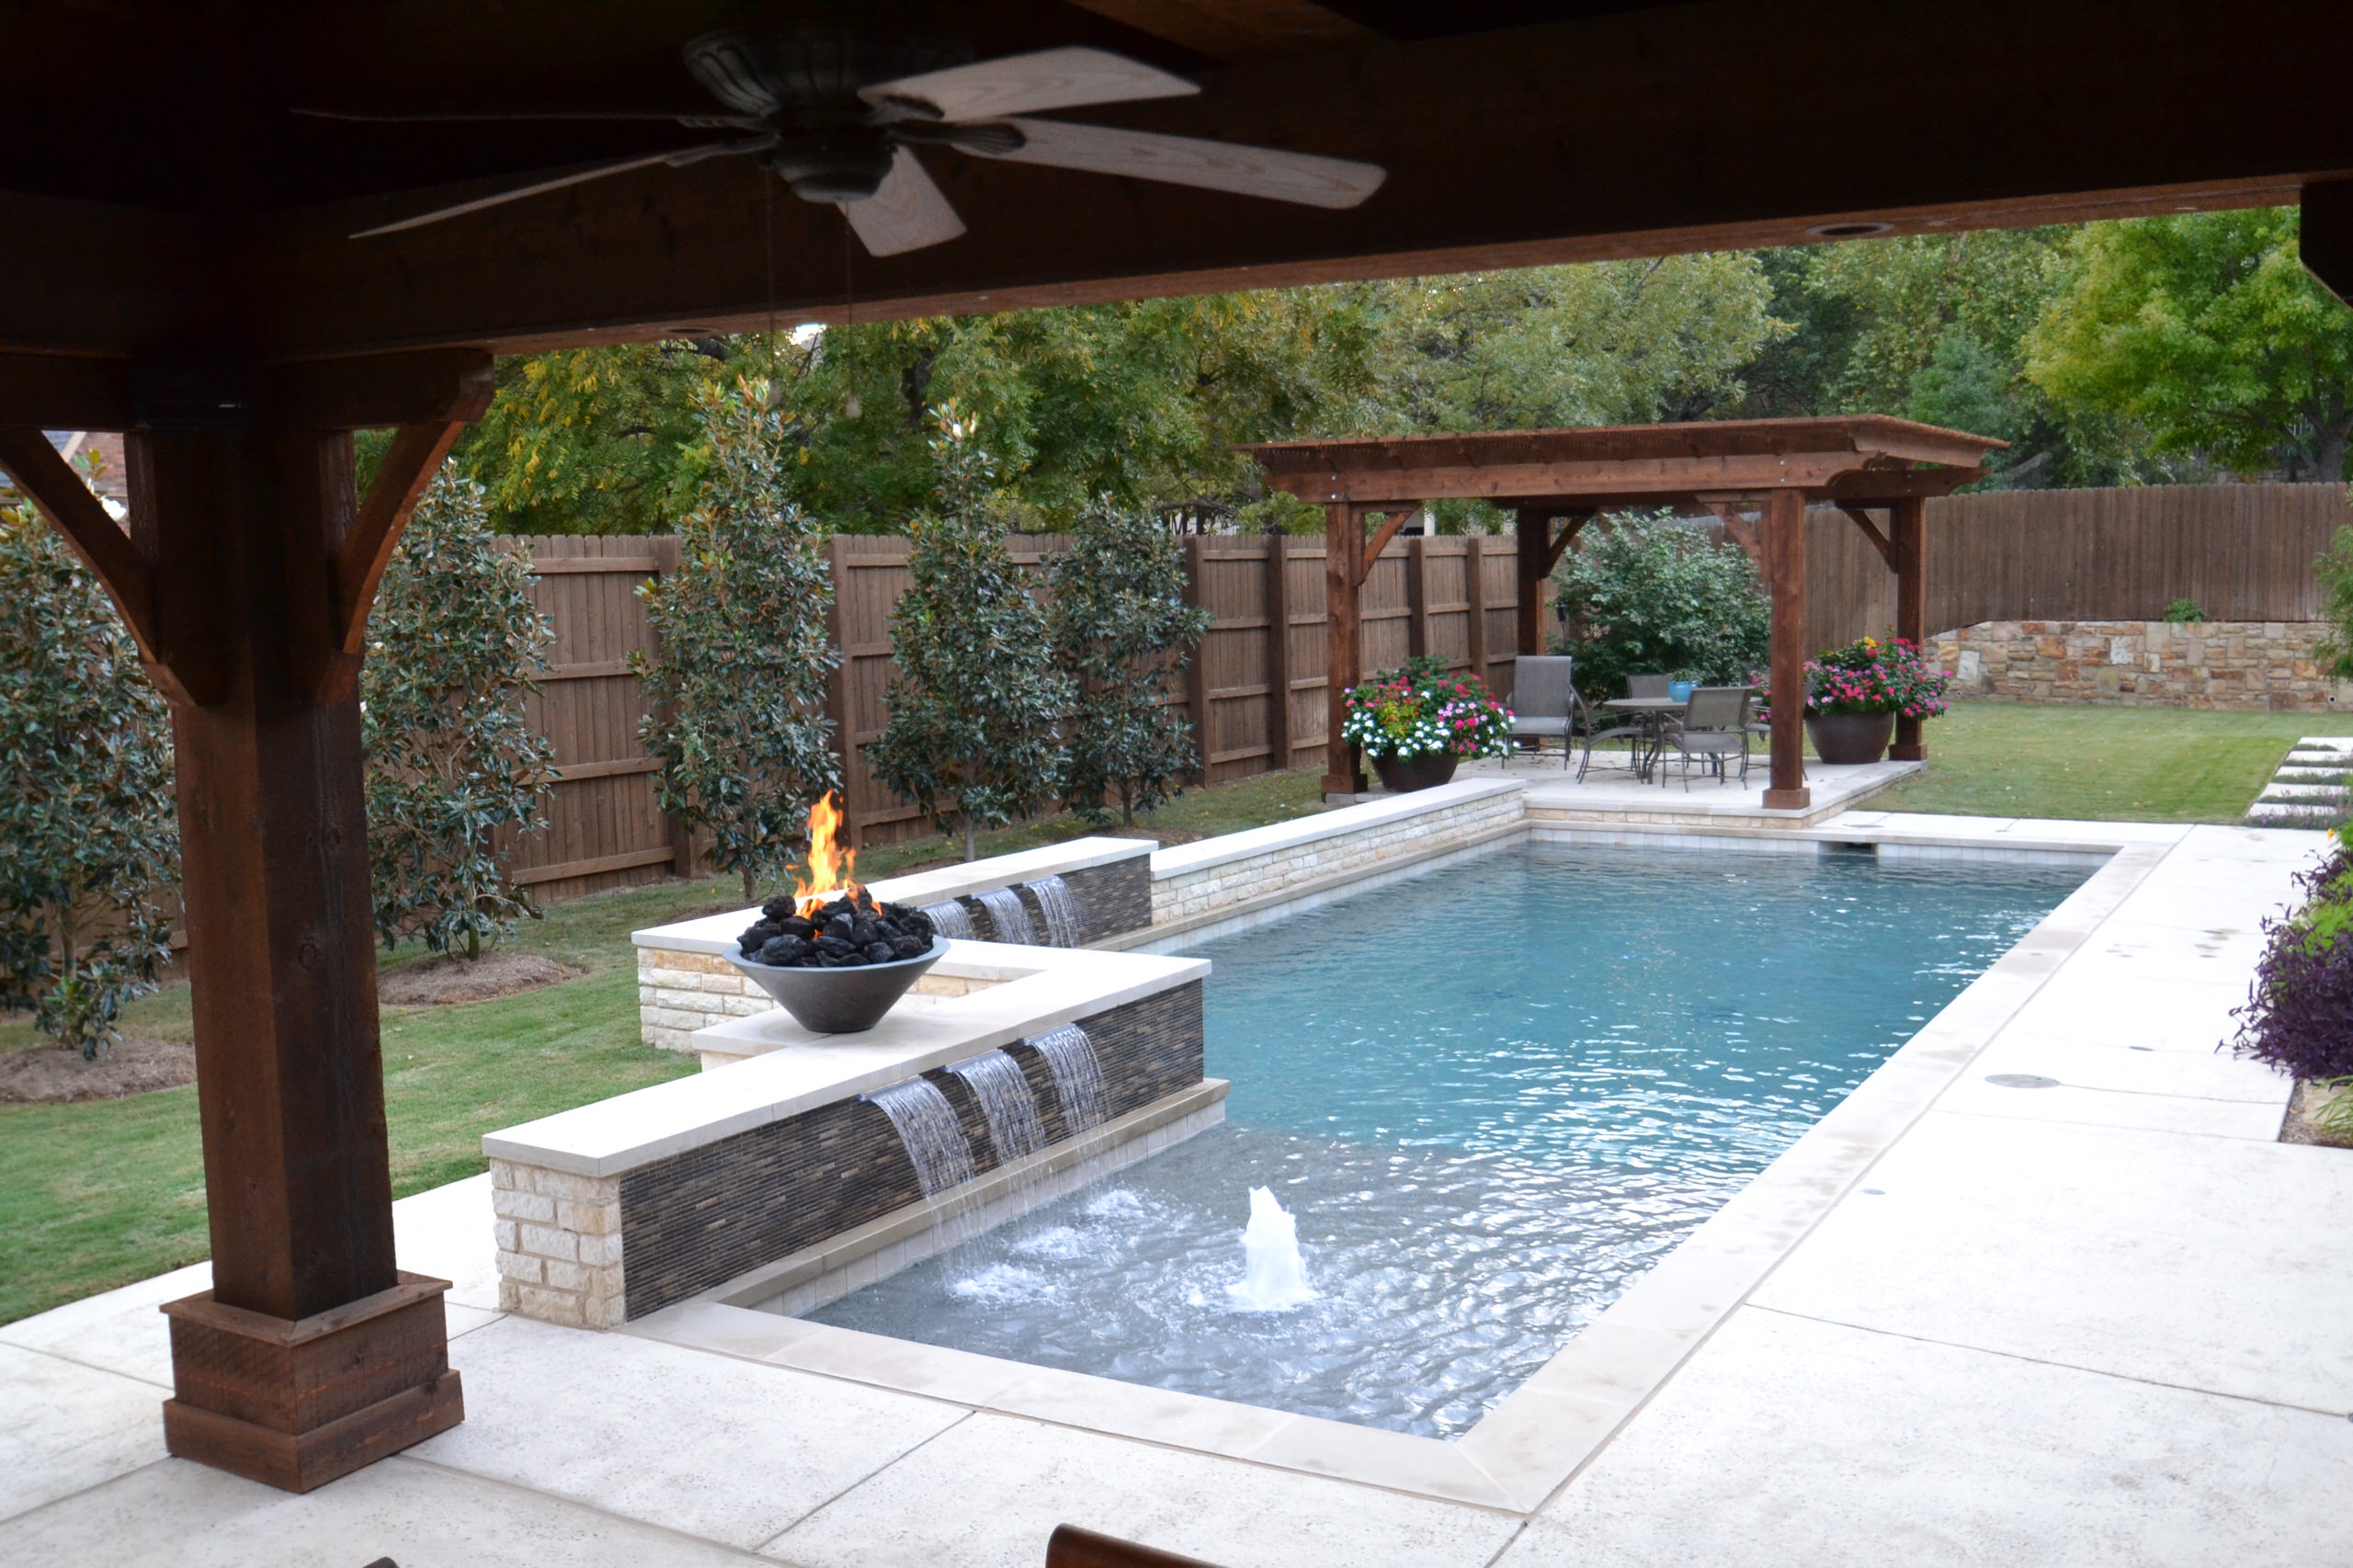 75 Beautiful Small Backyard Pool, In Ground Pool Ideas For Small Yards